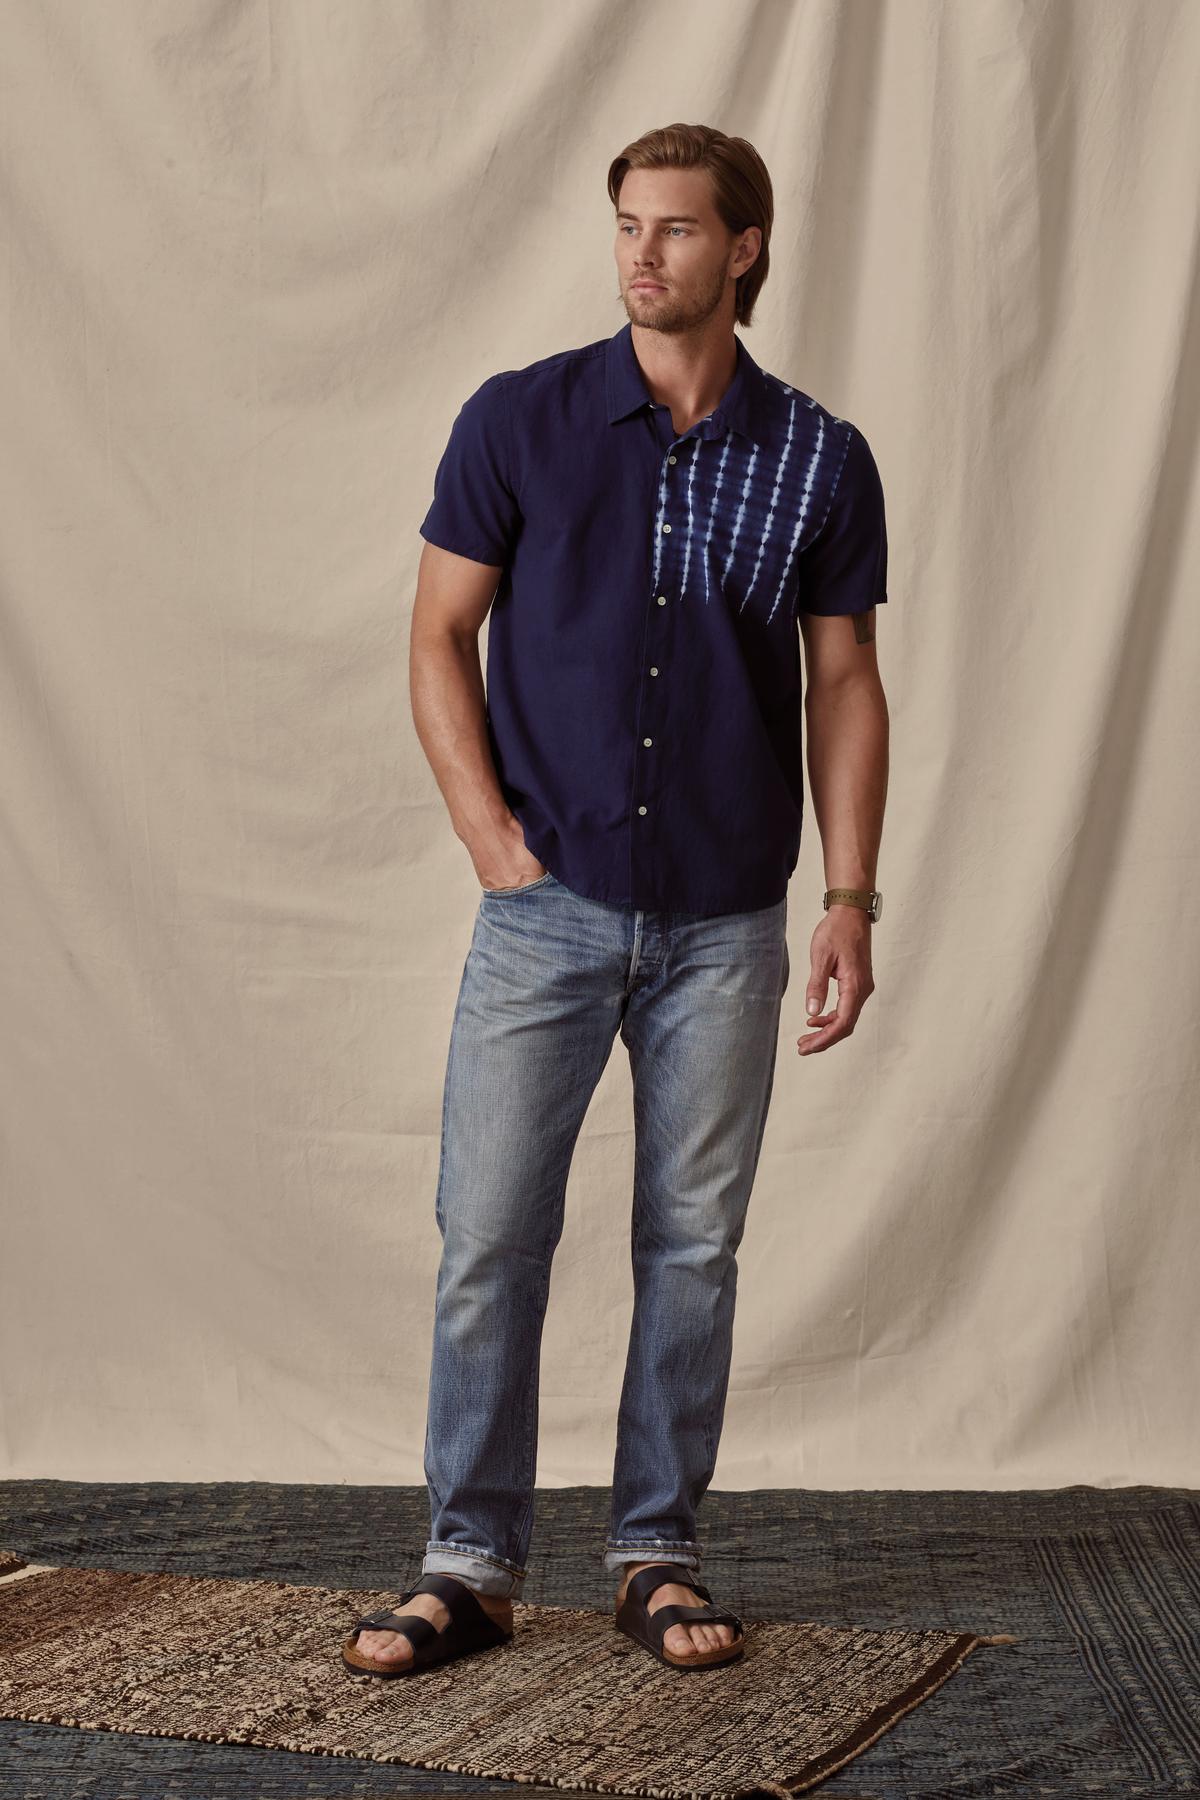 A man stands on a rug, wearing a Velvet by Graham & Spencer Rafael button-up shirt, jeans, and black sandals, with one hand slightly raised.-36753533763777